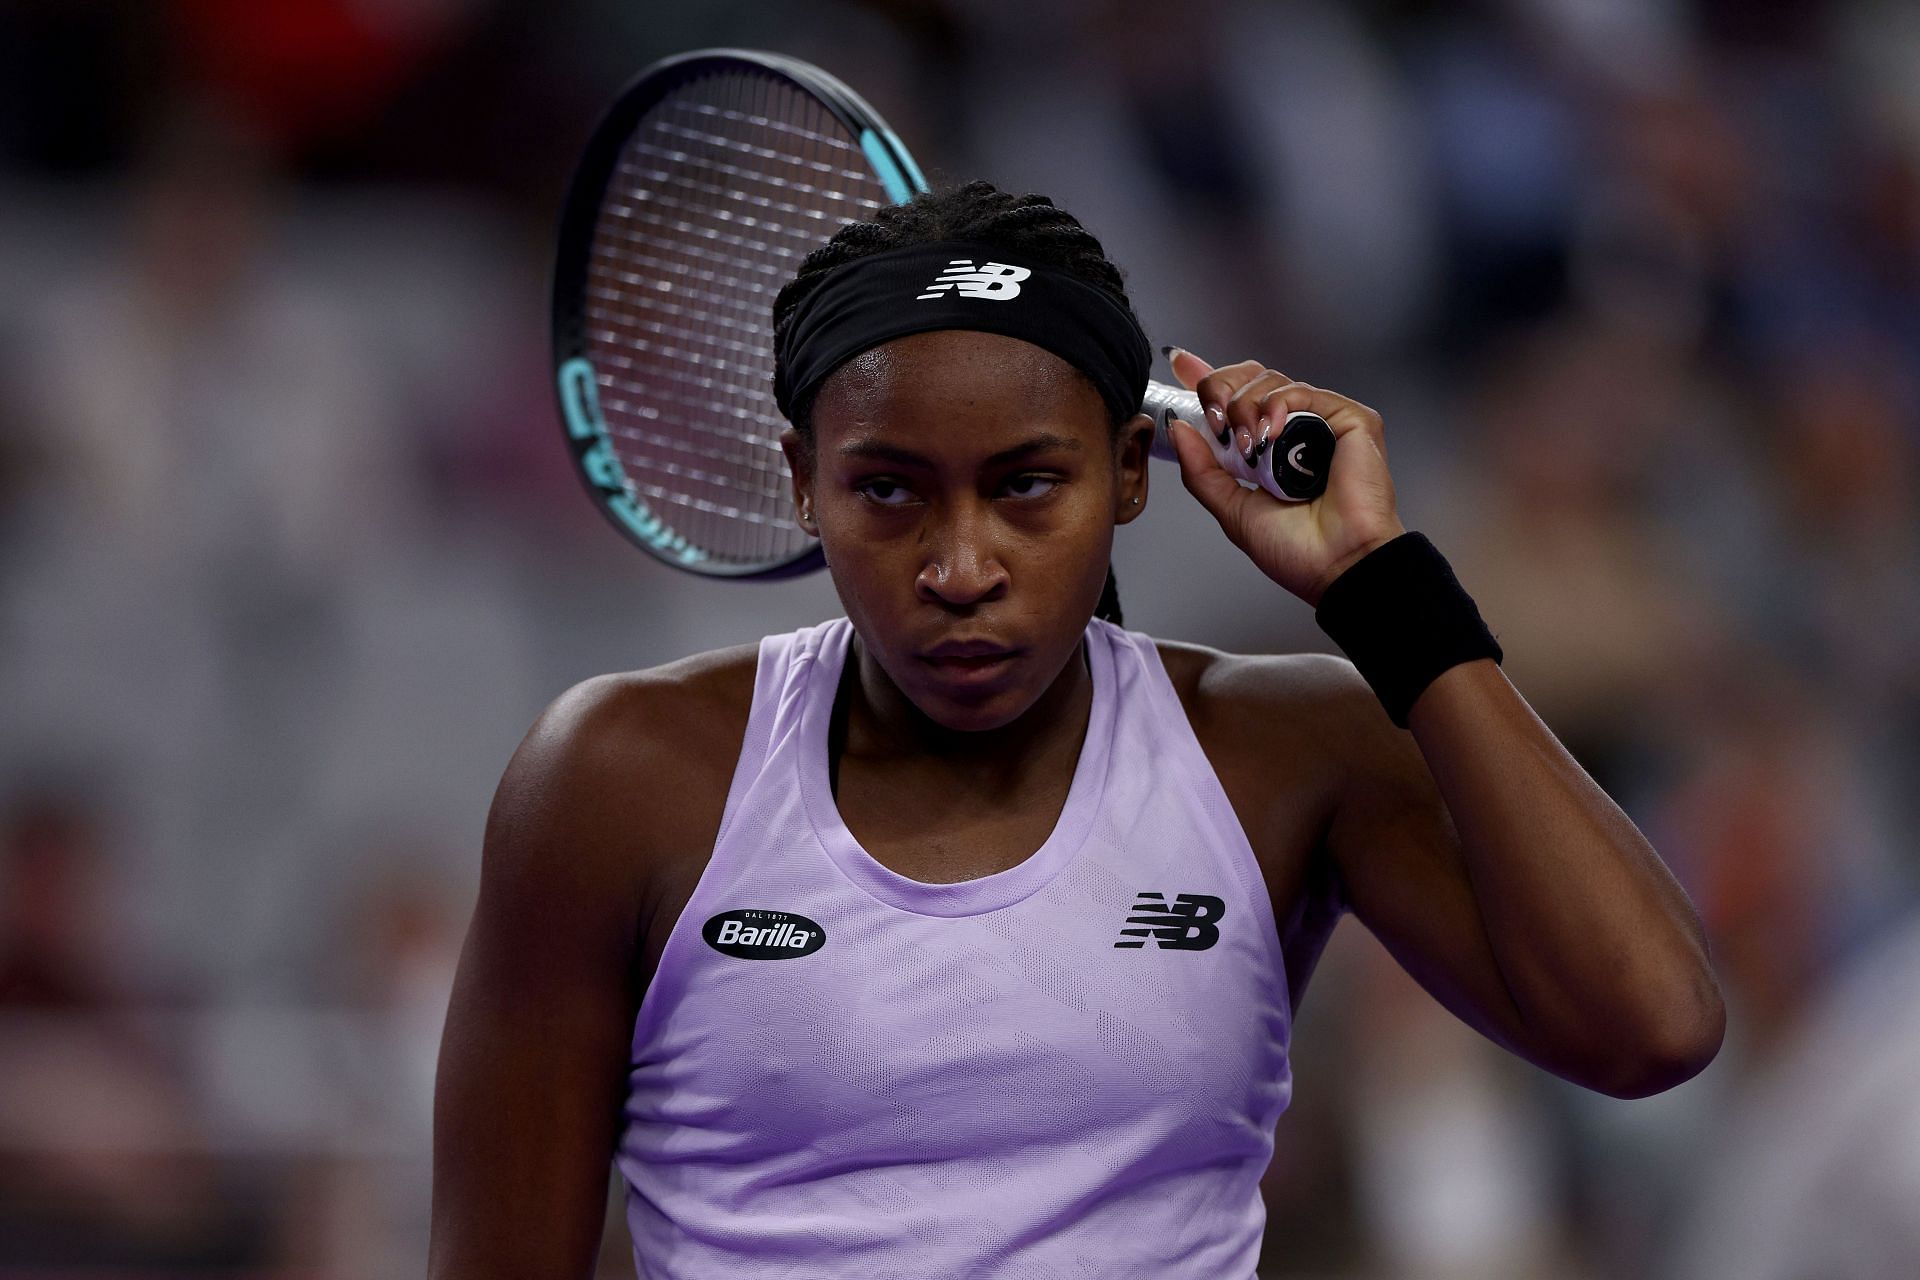 Coco Gauff in action at the WTA Finals.